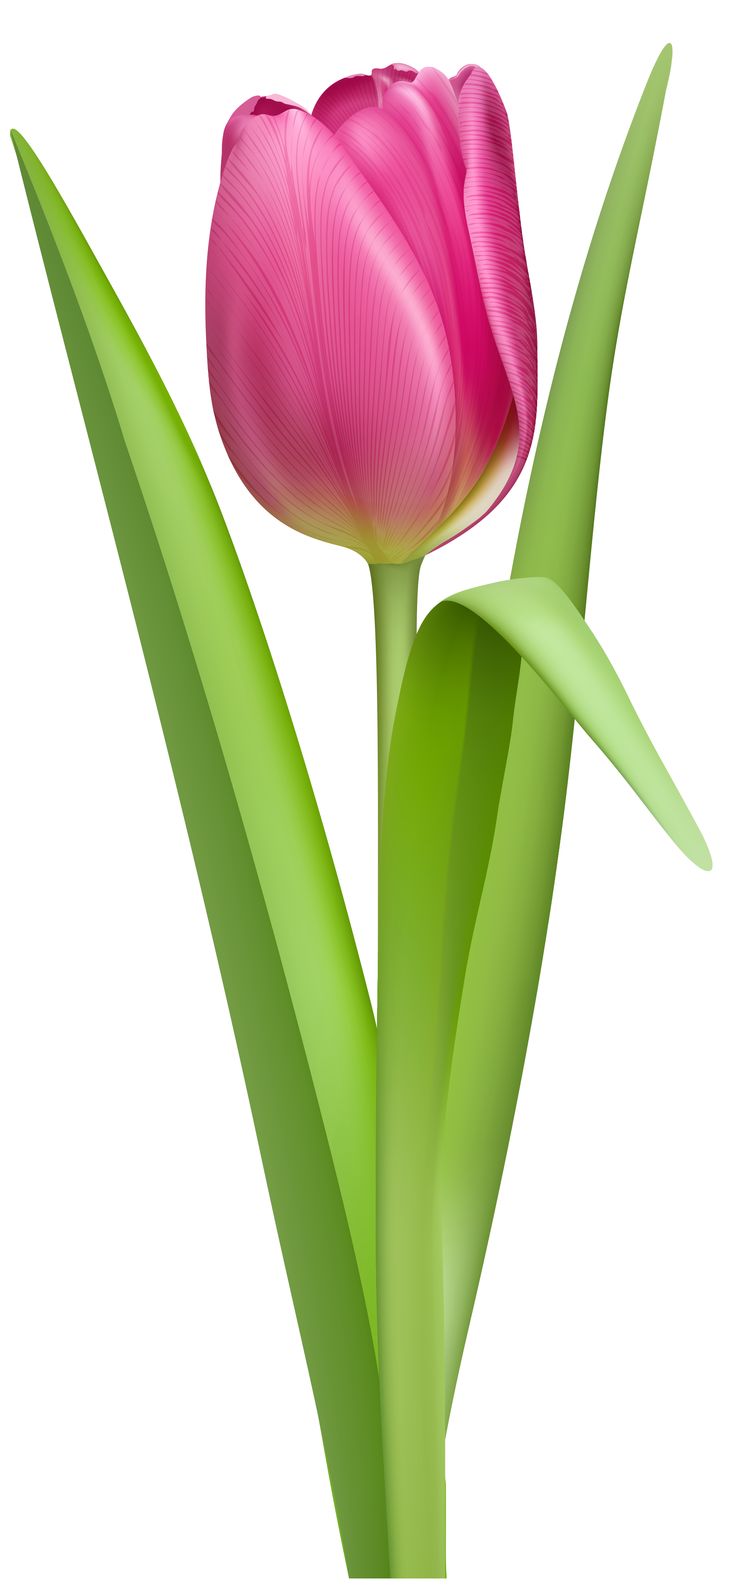 Red Transparent Tulips Flowers Clipart 